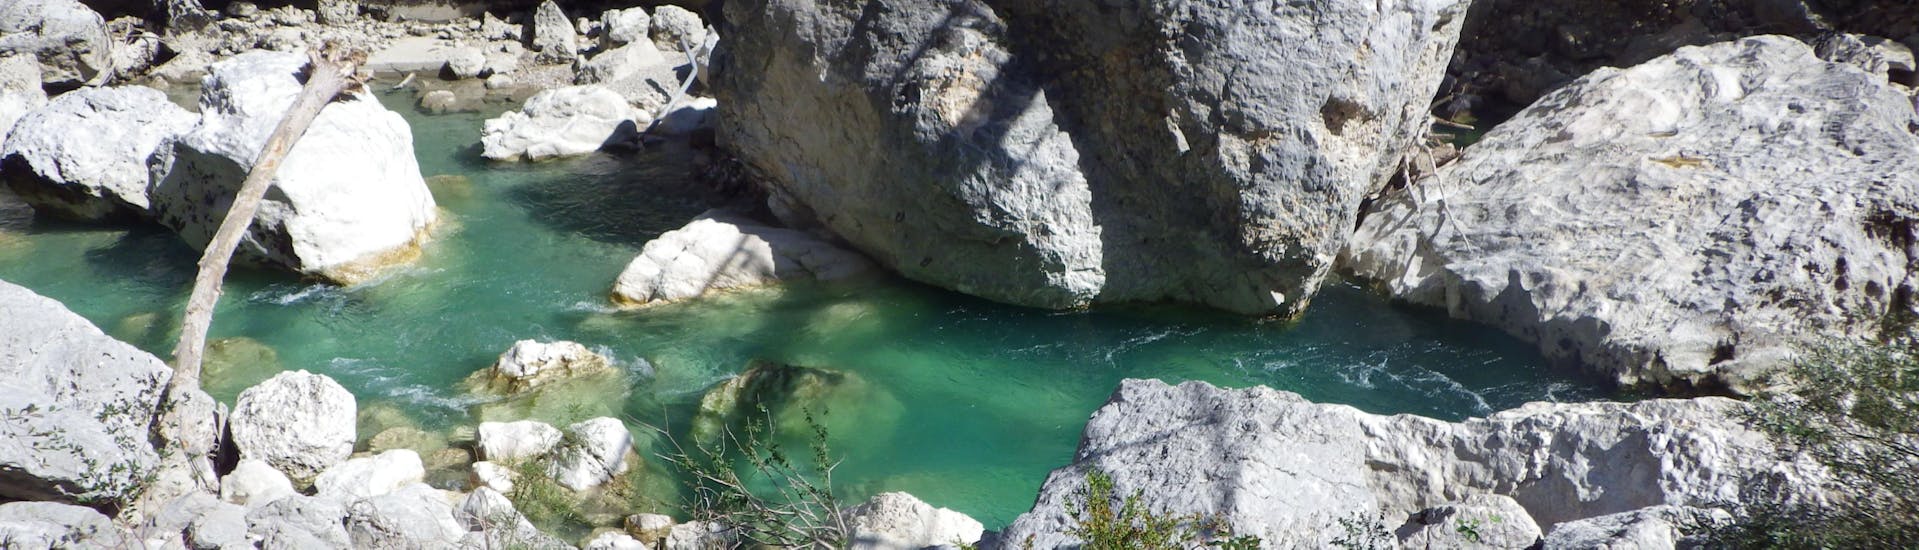 River Trekking in the Grand Canyon of Verdon - Sport.